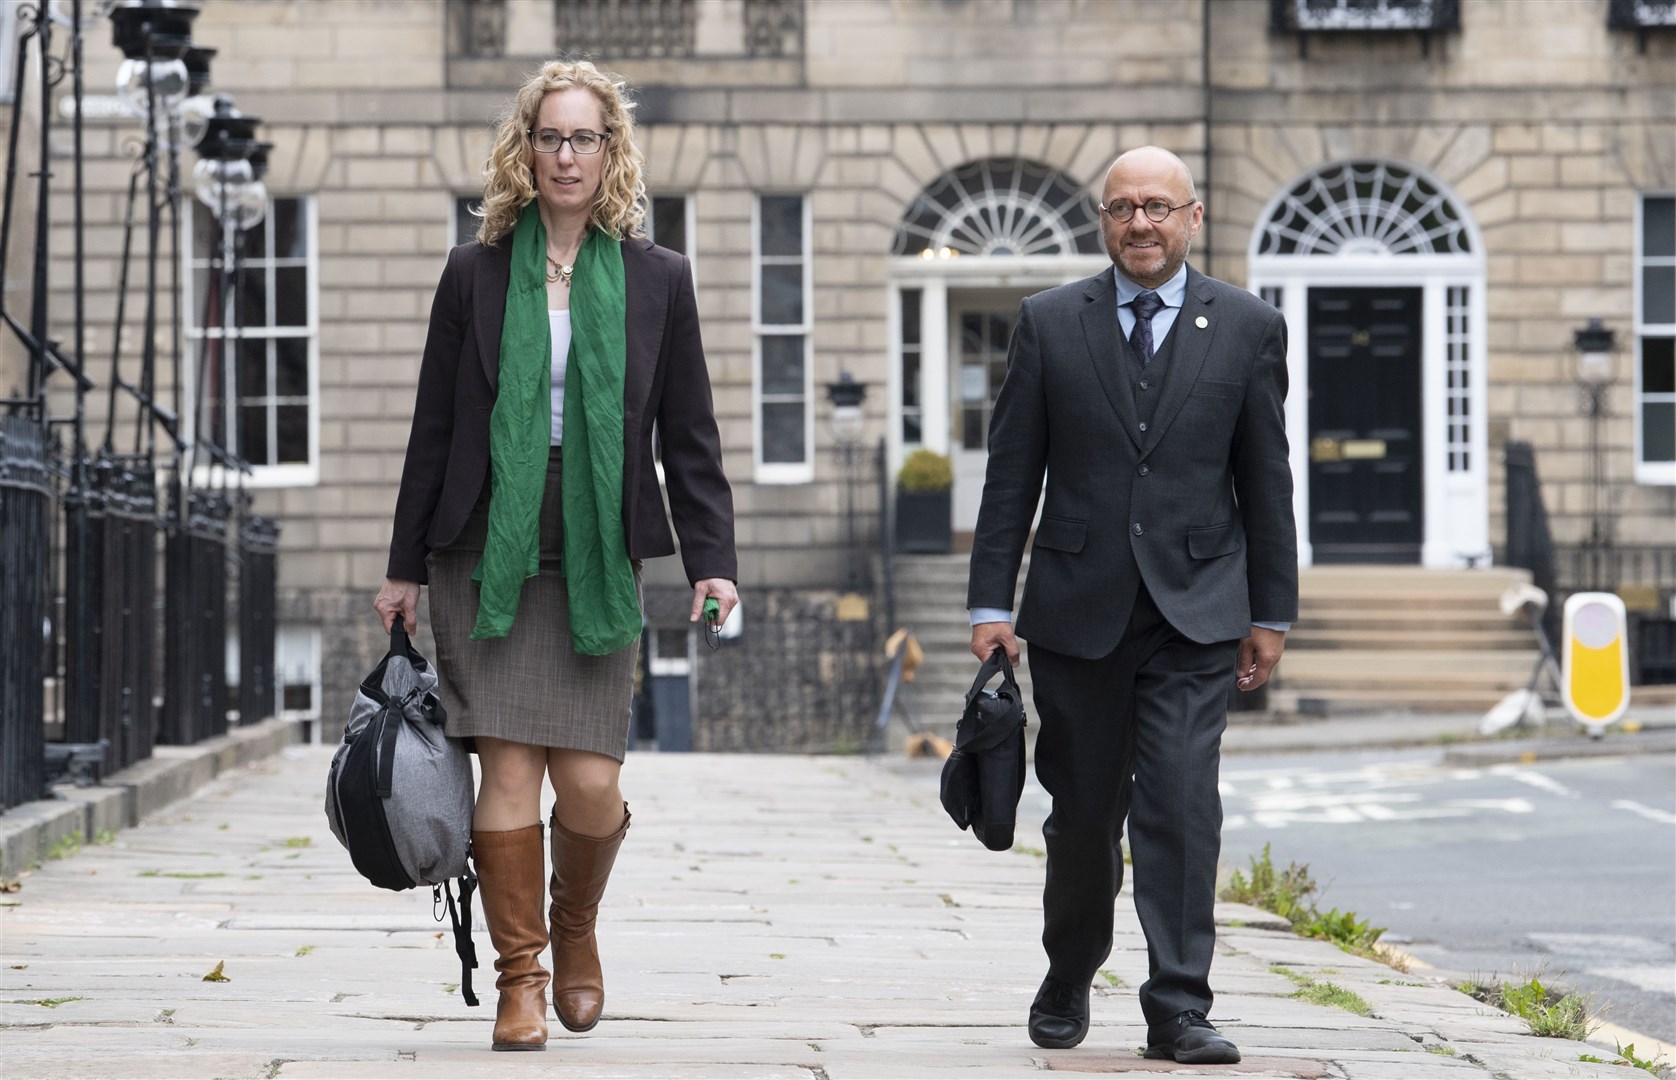 The Bute House Agreement gave Scottish Green co-leaders Lorna Slater and Patrick Harvie ministerial posts in the Scottish Government – but there are now growing tensions between the two parties (Lesley Martin/PA)